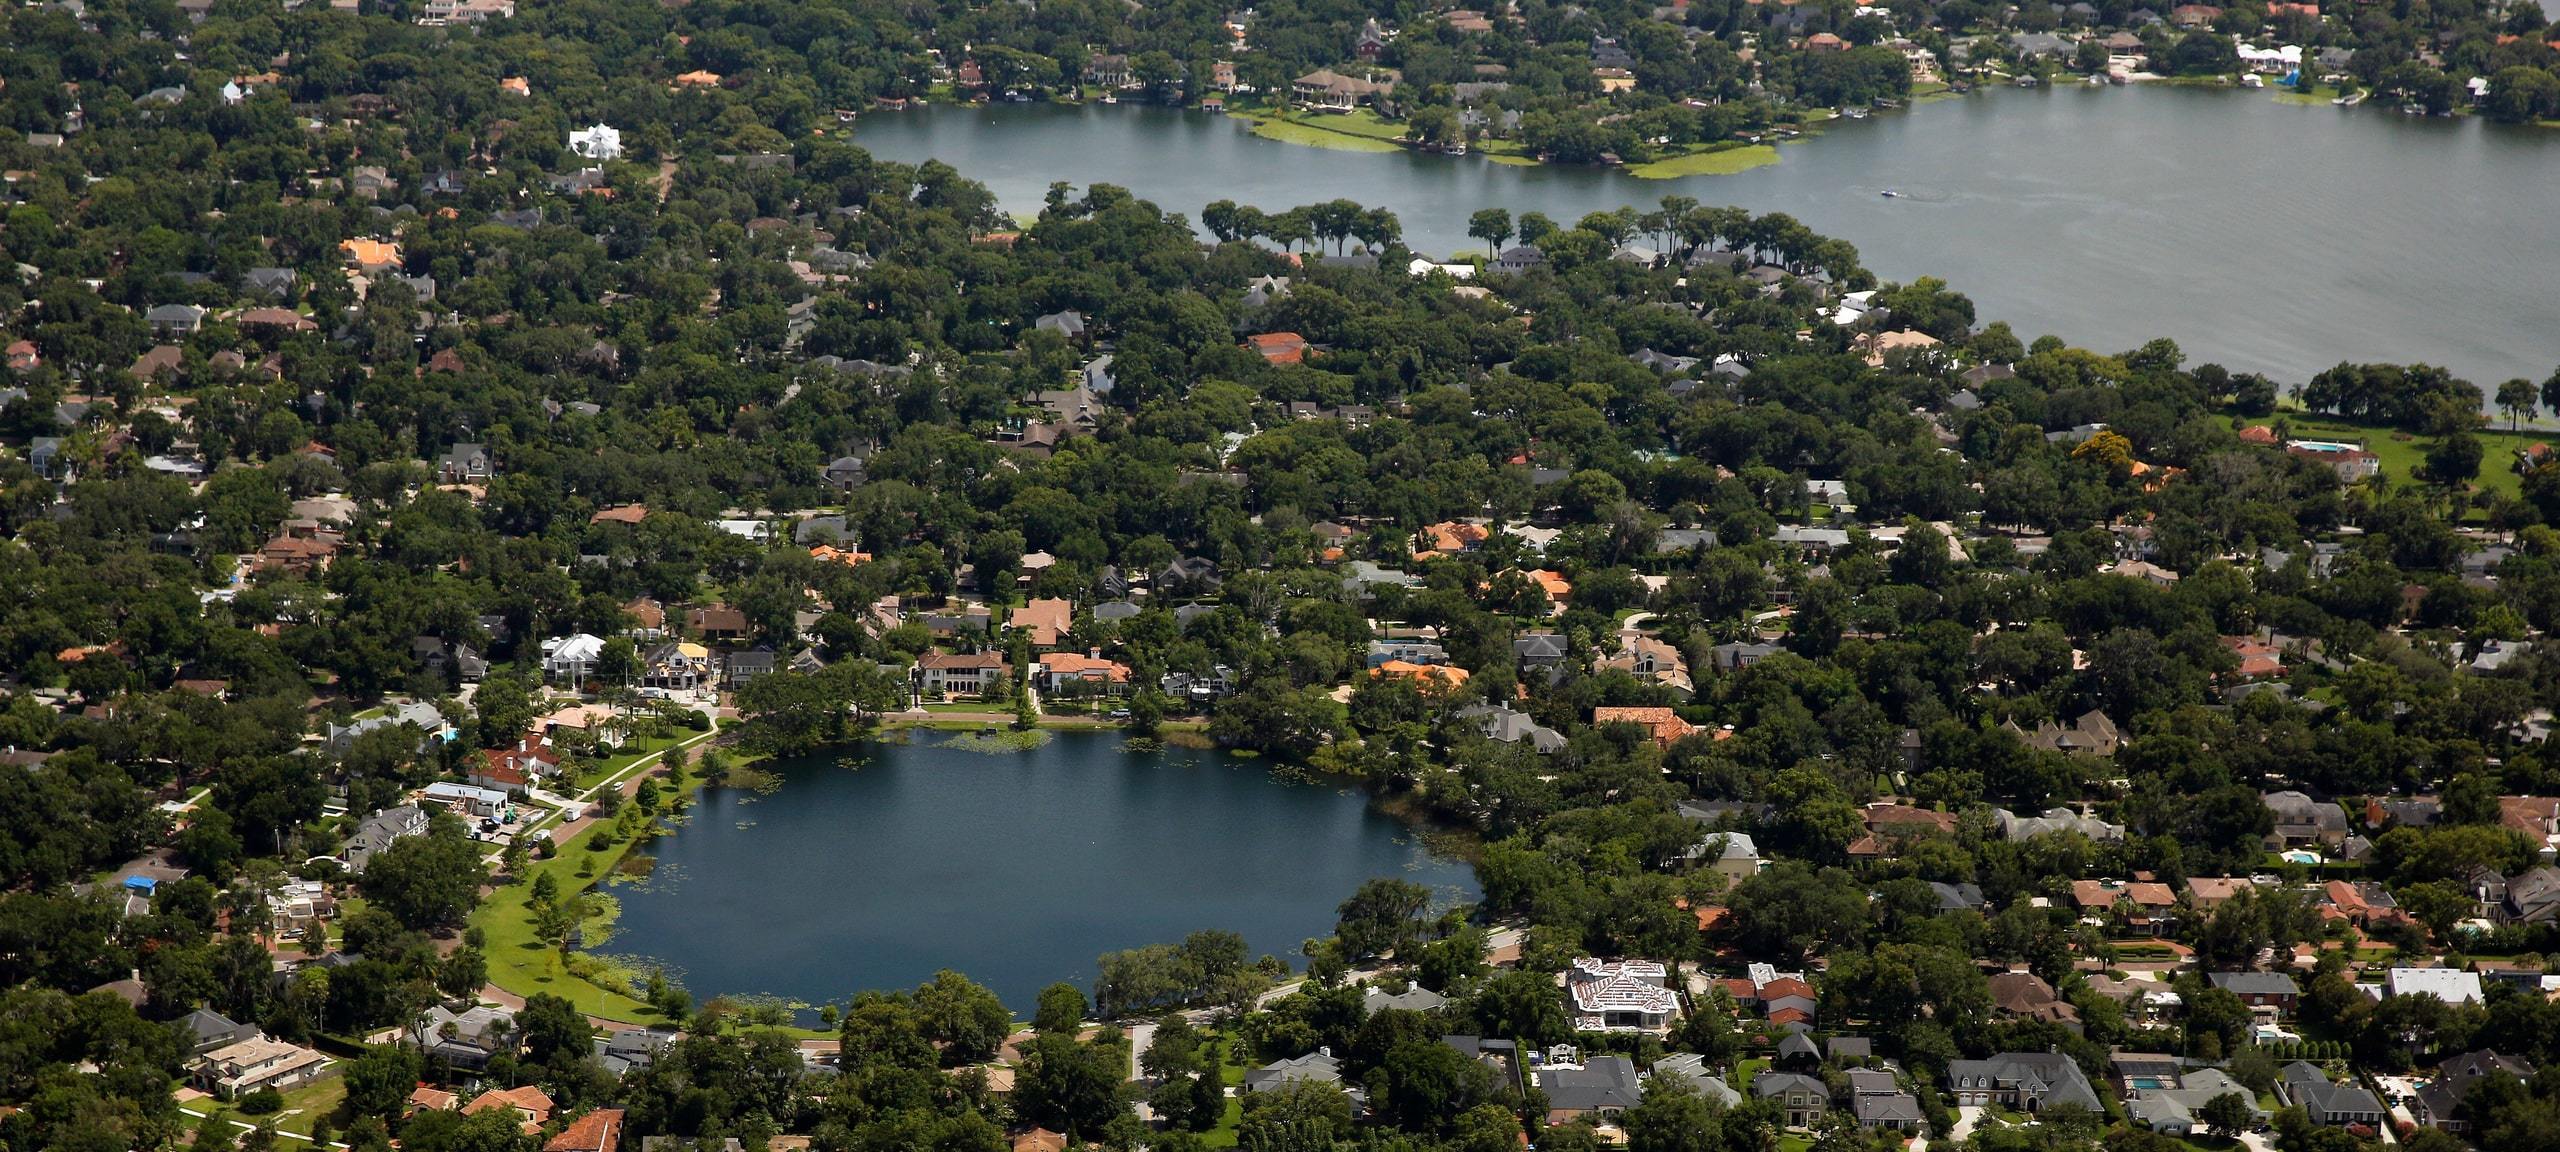 Aerial view over Maitland, FL with homes around lakes